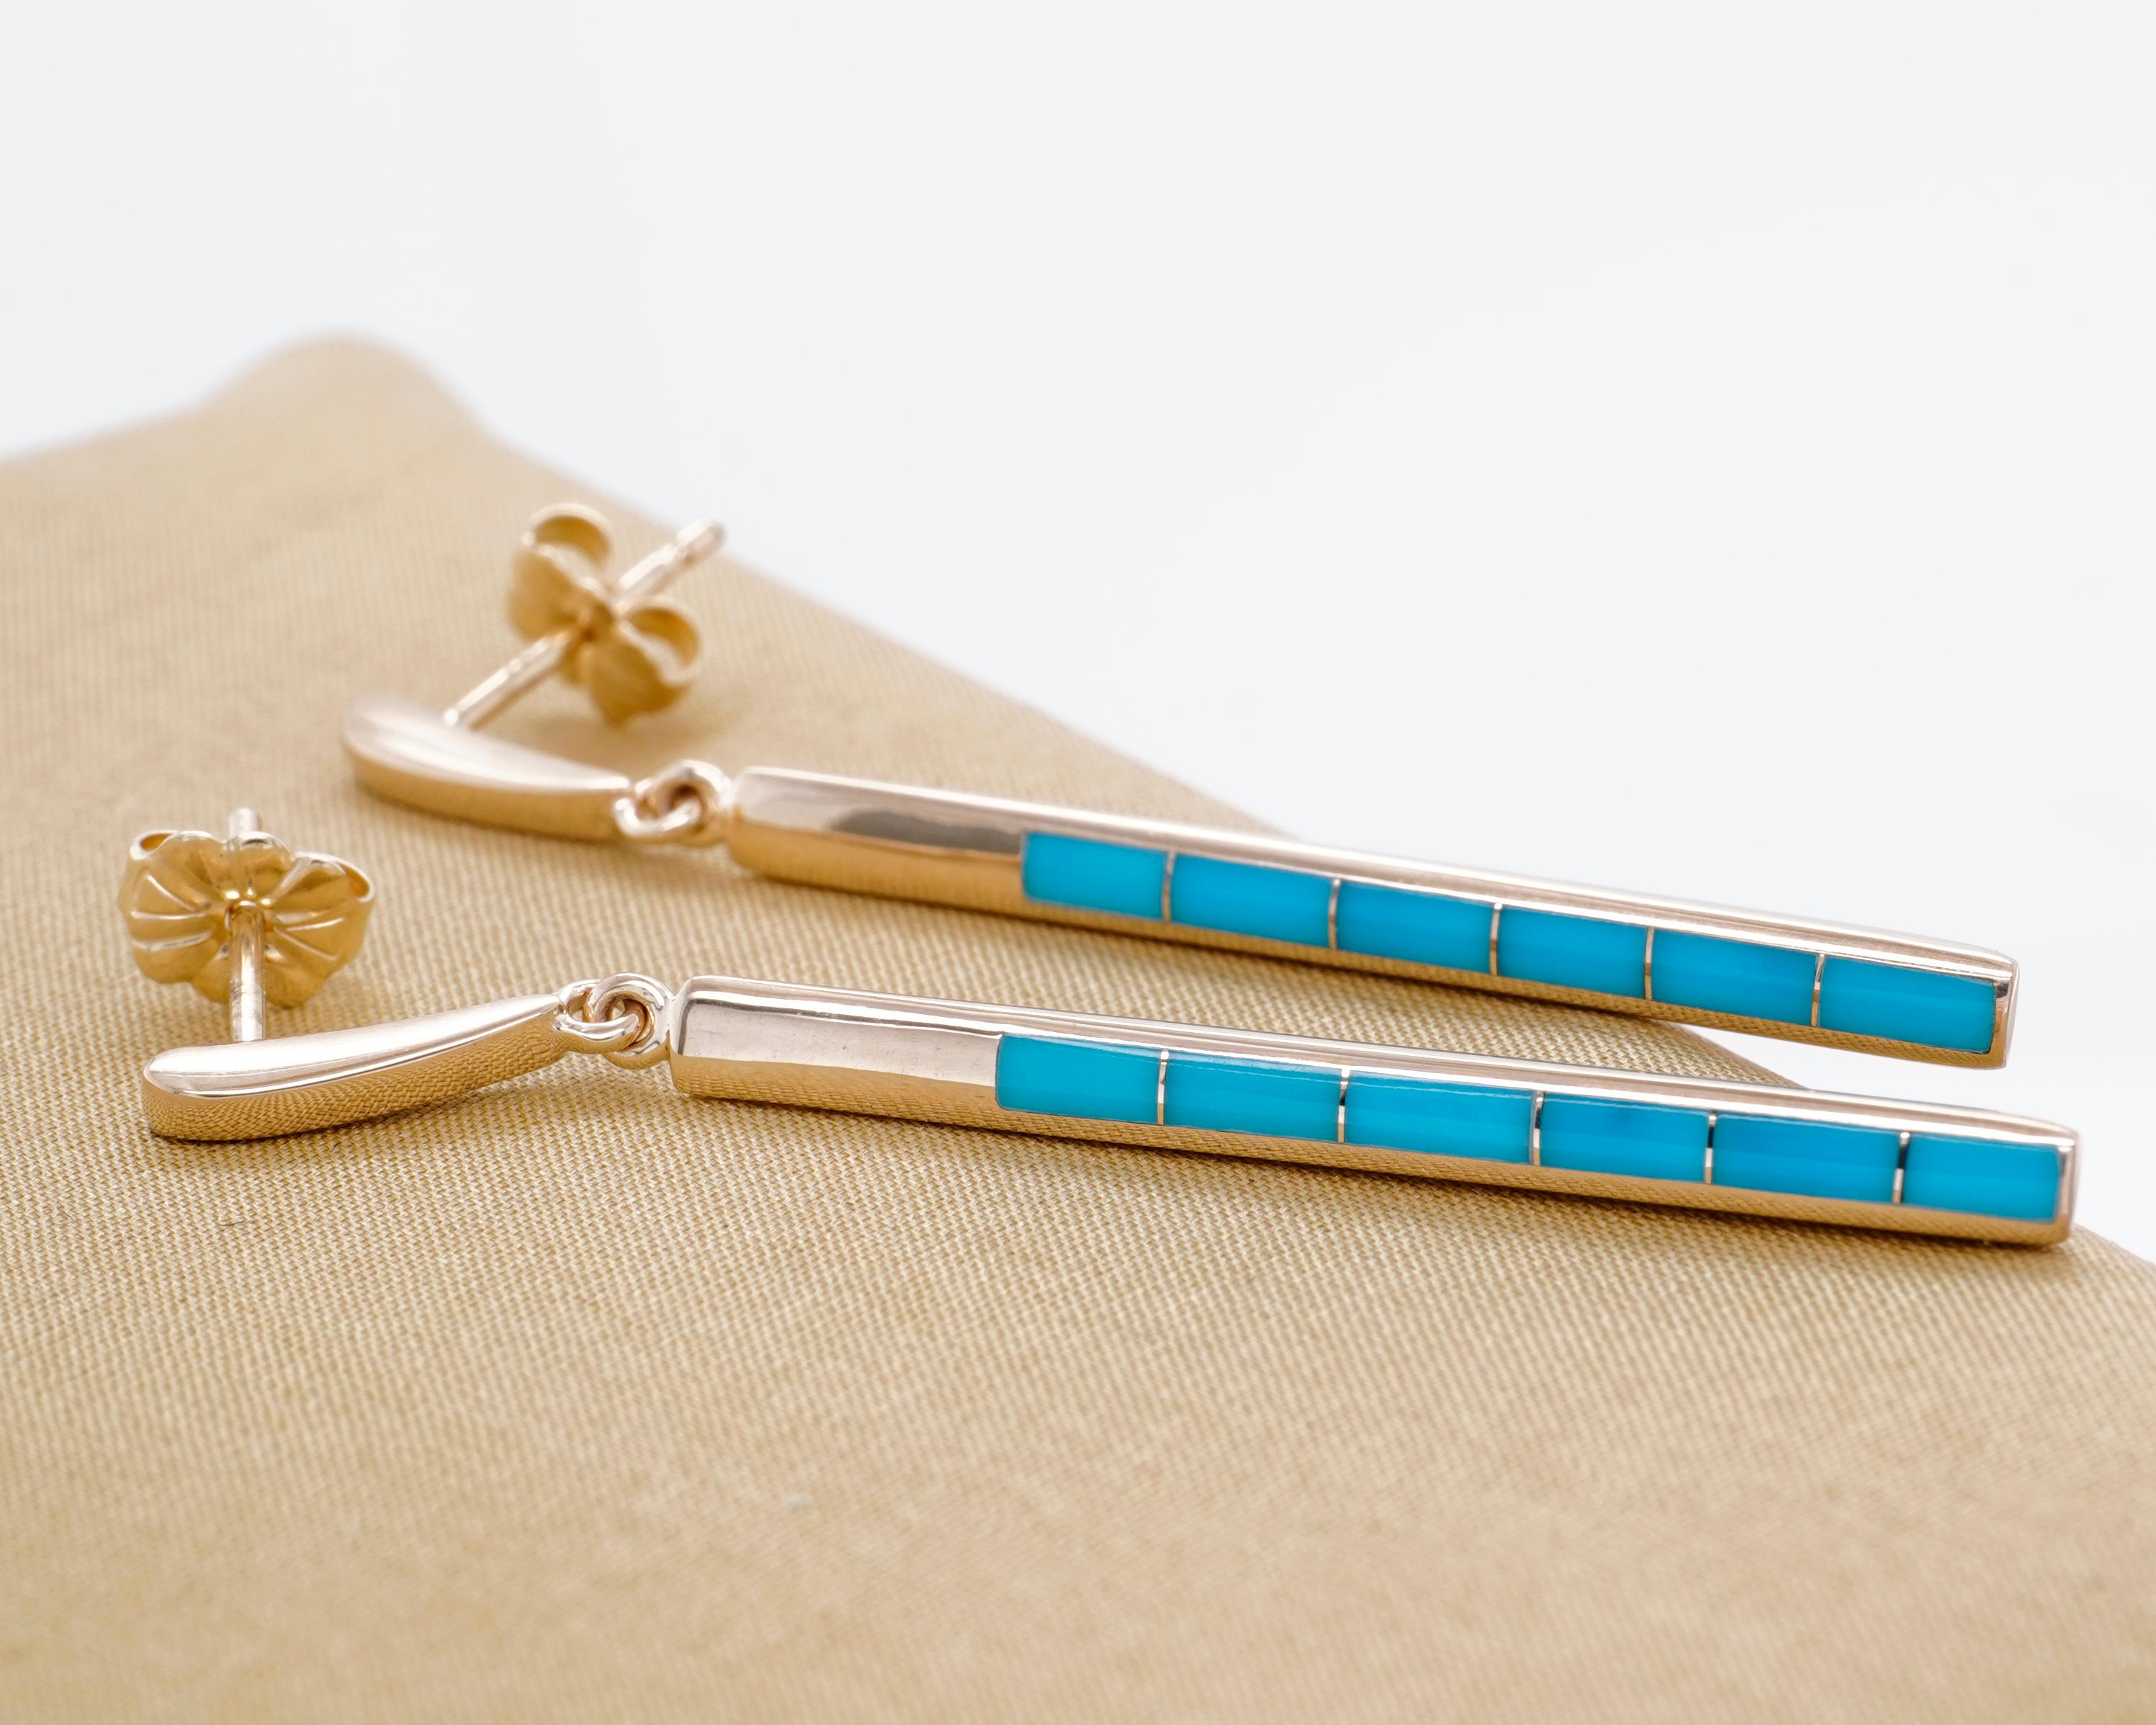 Square Cut Delicate, Long, Sleeping Beauty Turquoise Inlay, Earrings, 14 Karat Gold For Sale